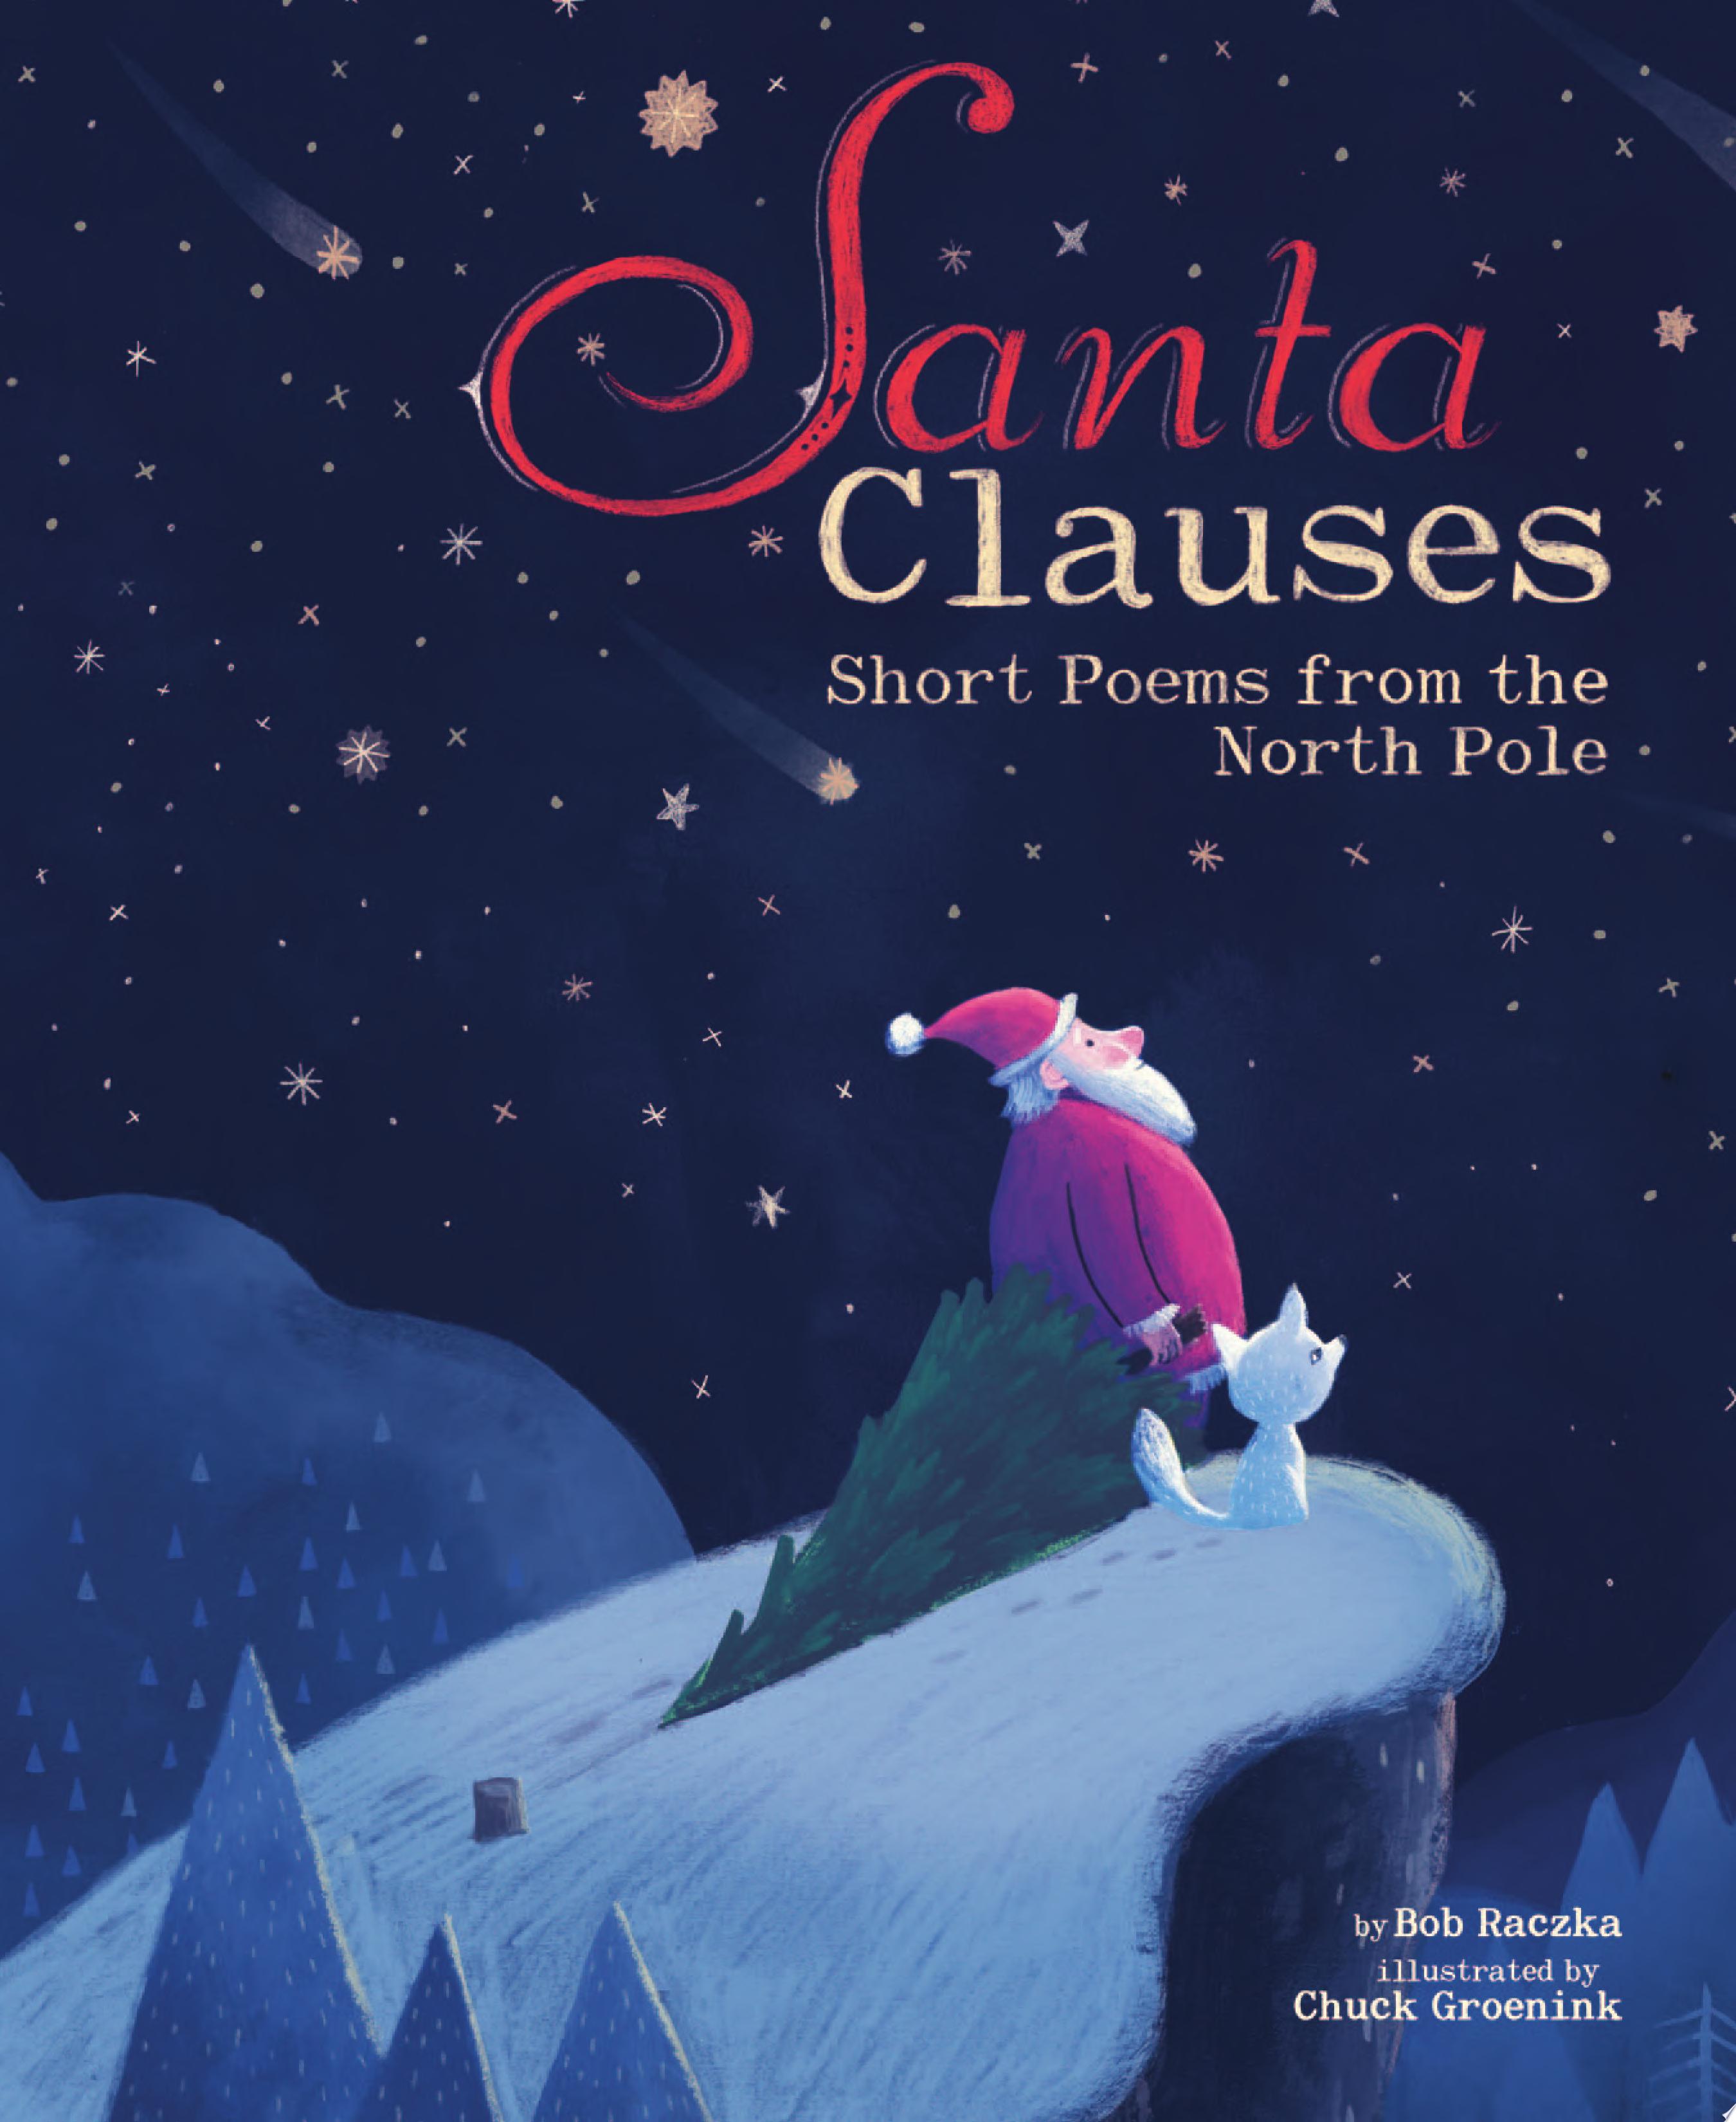 Image for "Santa Clauses"